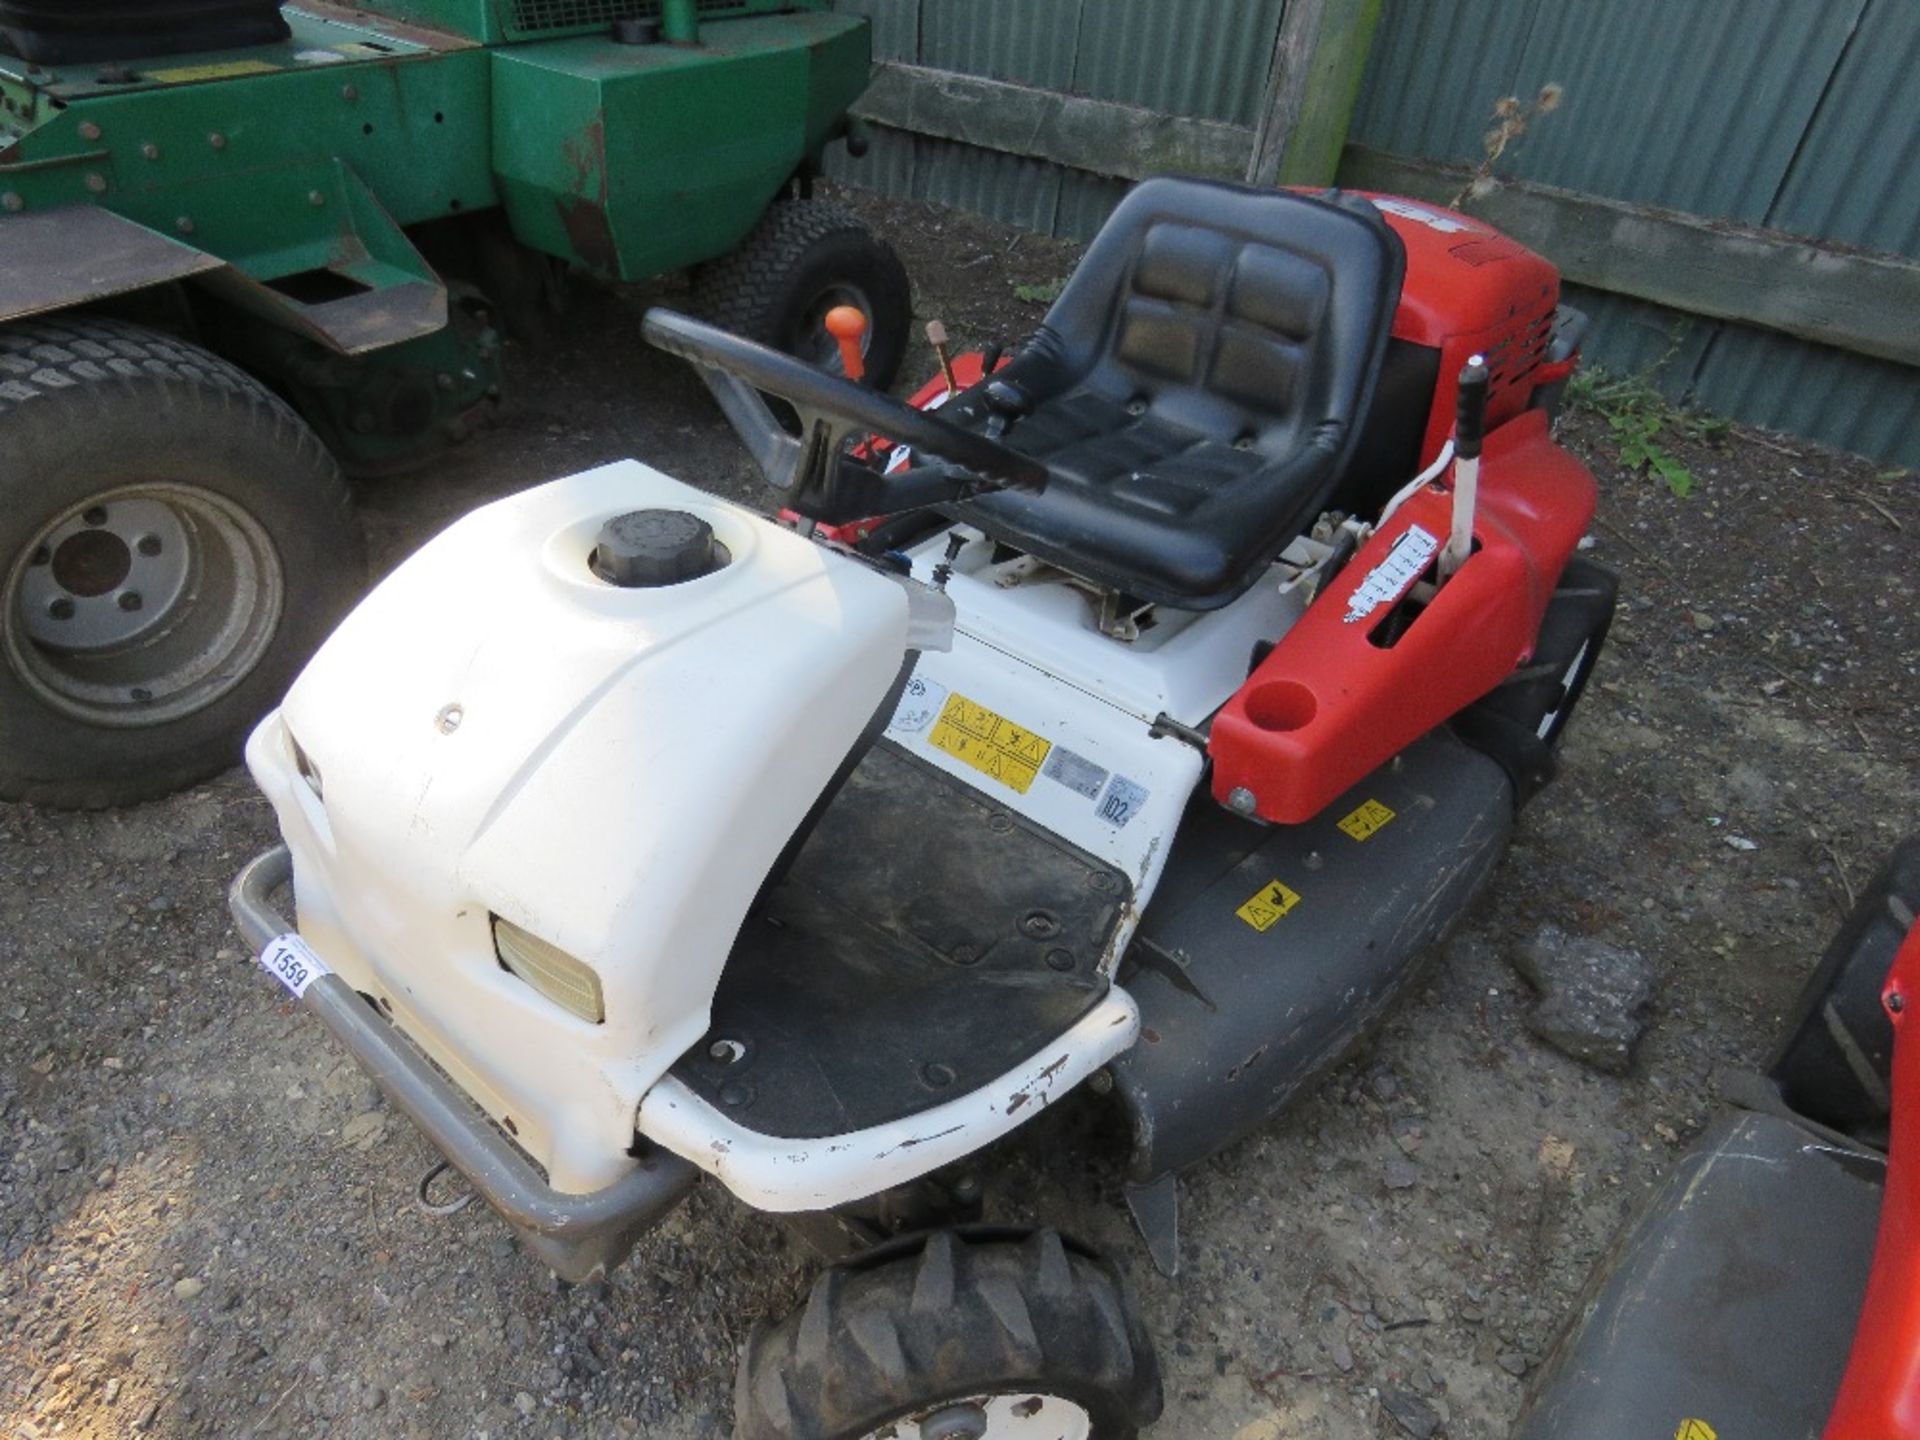 OREC RM97B PROFESSIONAL ROUGH CUT RIDE ON MOWER, YEAR 2015 BUILD, 391 REC HOURS. PN:92/47. SN:JD15A0 - Image 2 of 6